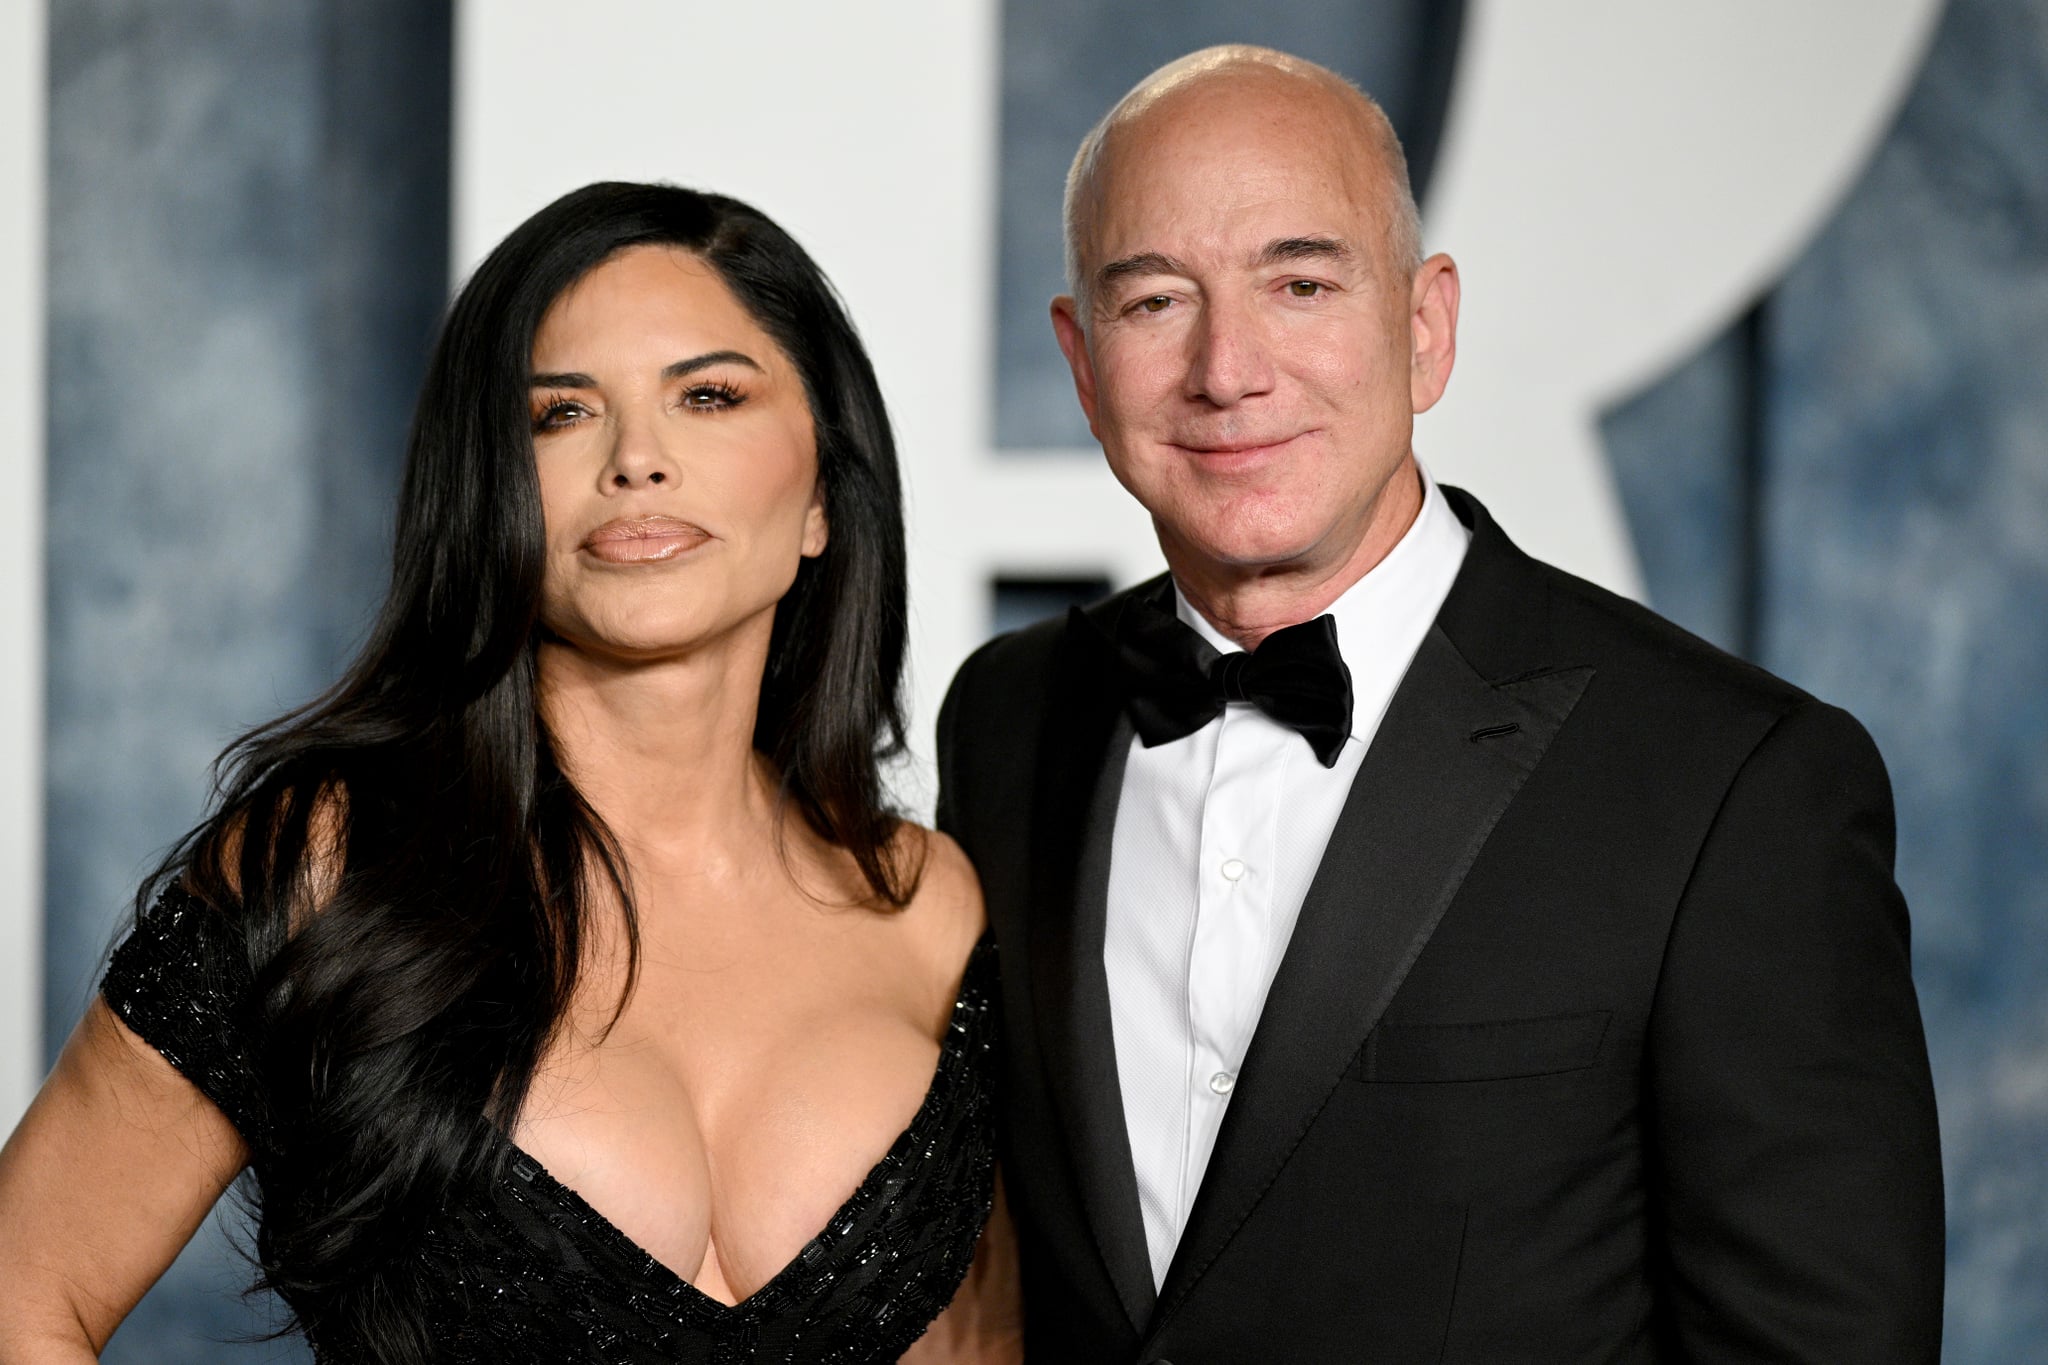 BEVERLY HILLS, CALIFORNIA - MARCH 12: Lauren Sánchez (L) and Jeff Bezos attend the 2023 Vanity Fair Oscar Party Hosted By Radhika Jones at Wallis Annenberg Centre for the Performing Arts on March 12, 2023 in Beverly Hills, California. (Photo by Lionel Hahn/Getty Images)